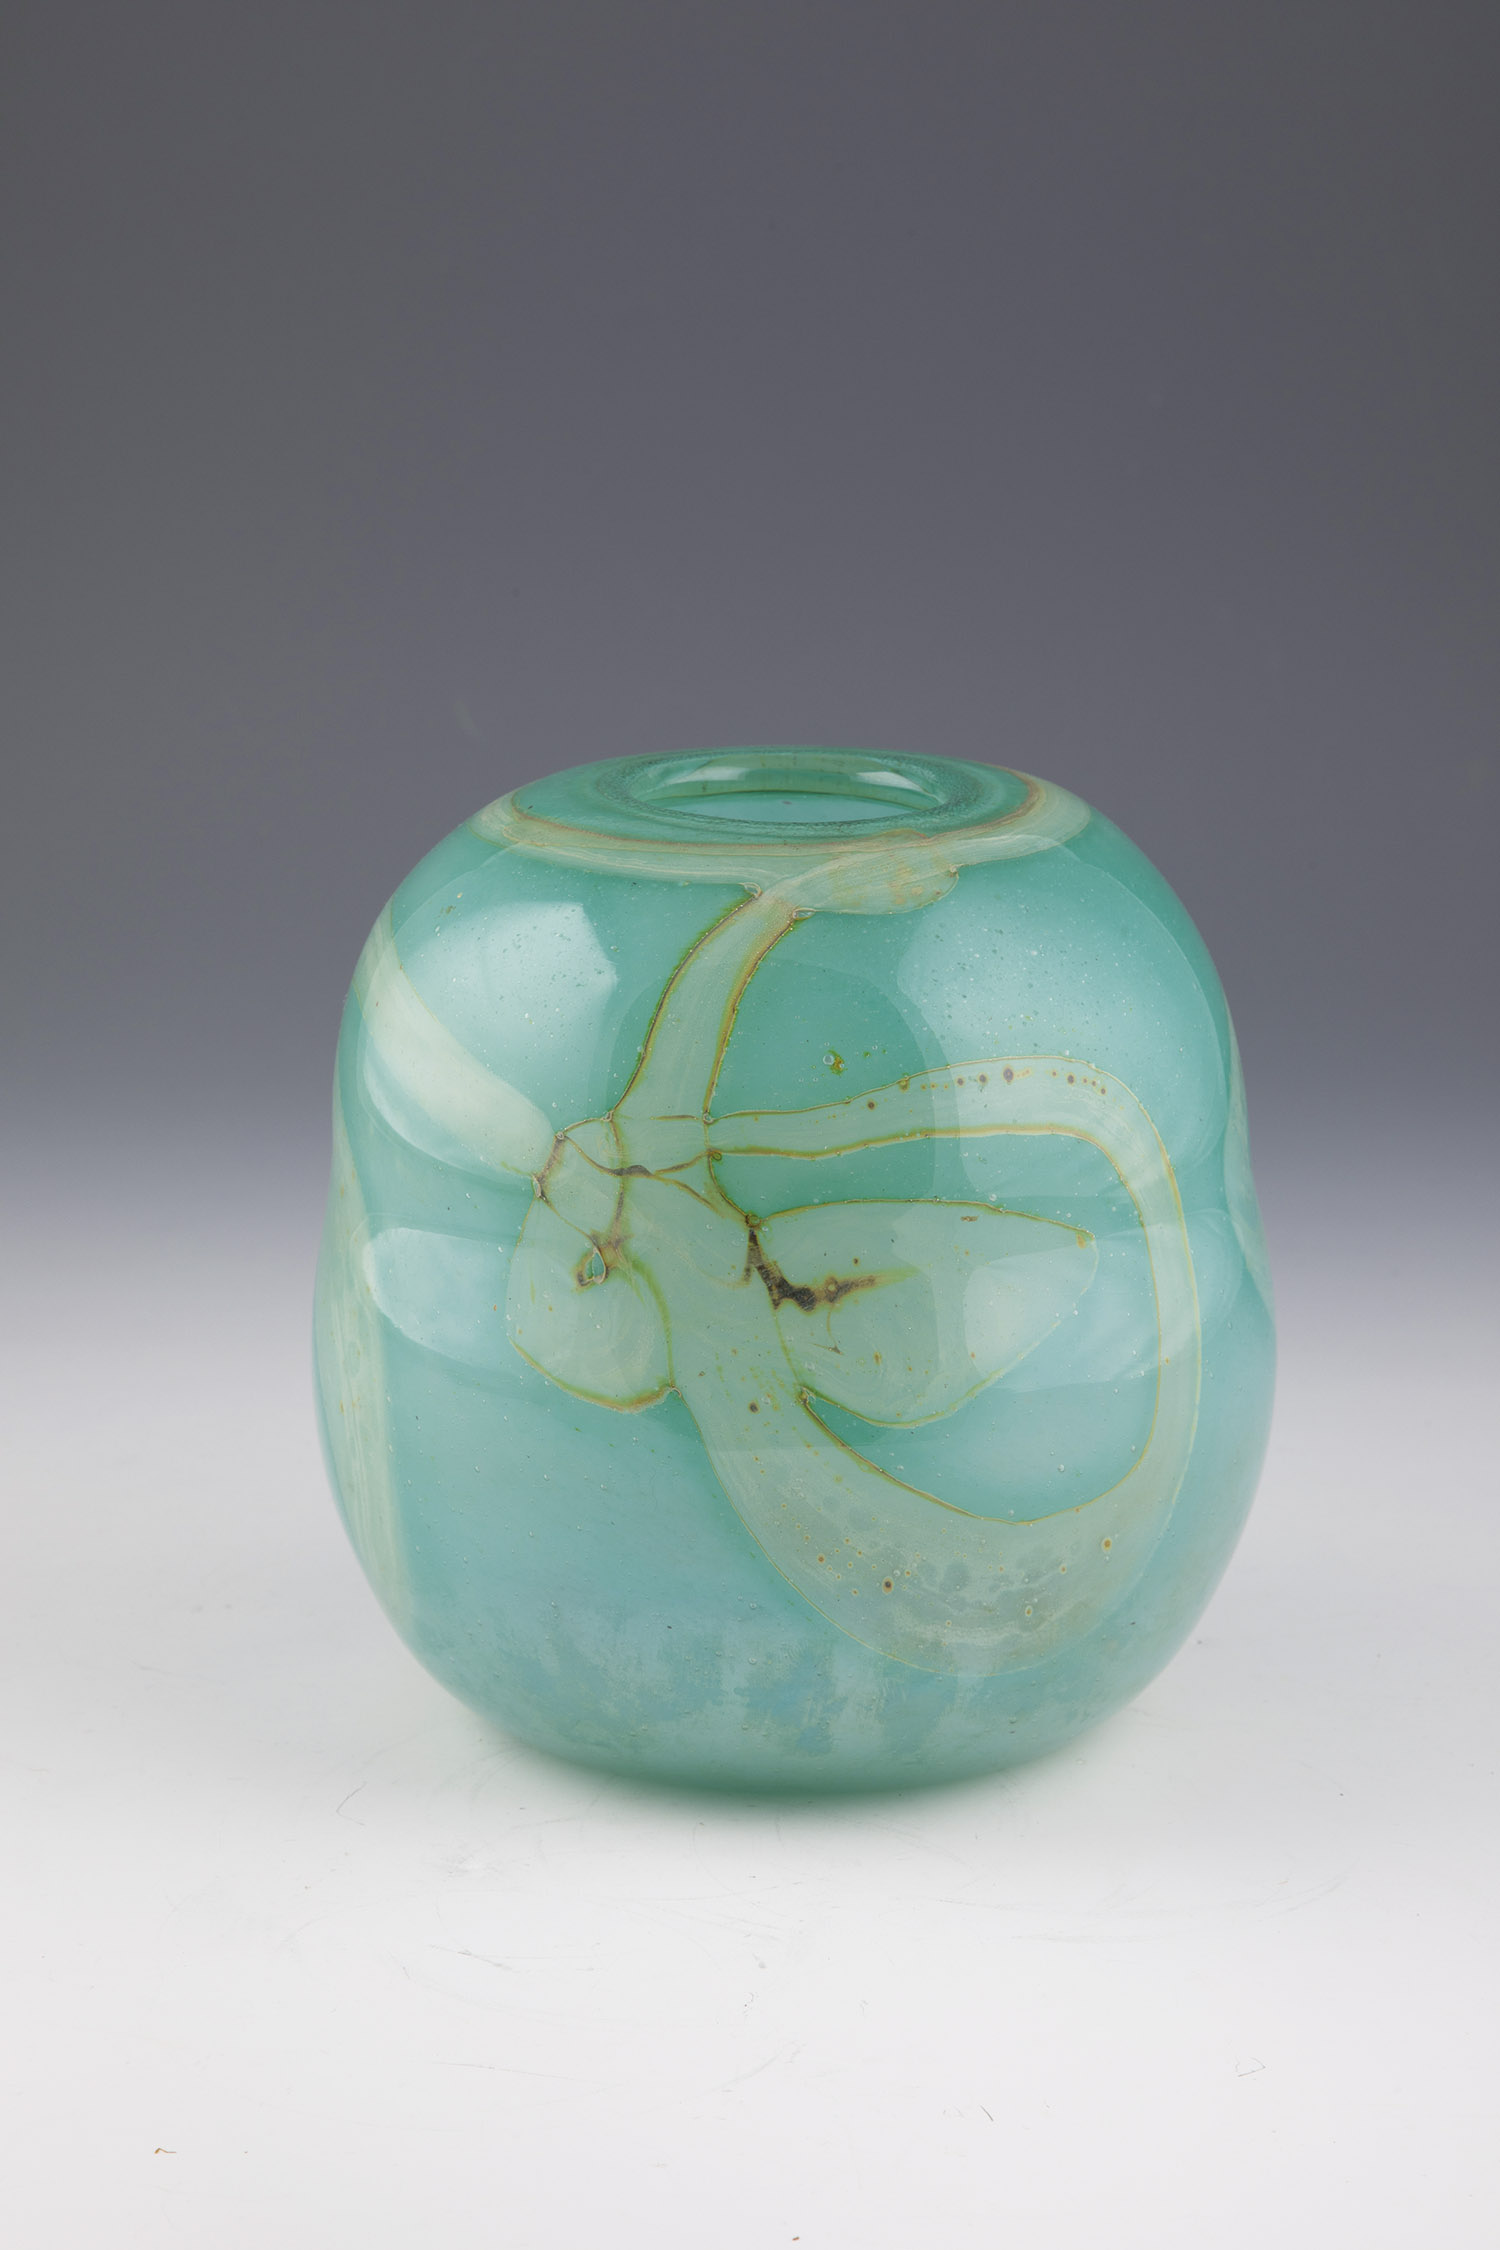 Vase Erwin Eisch, Frauenau, 1971 Colourless, turquoise underpinned glass with oxide melting.